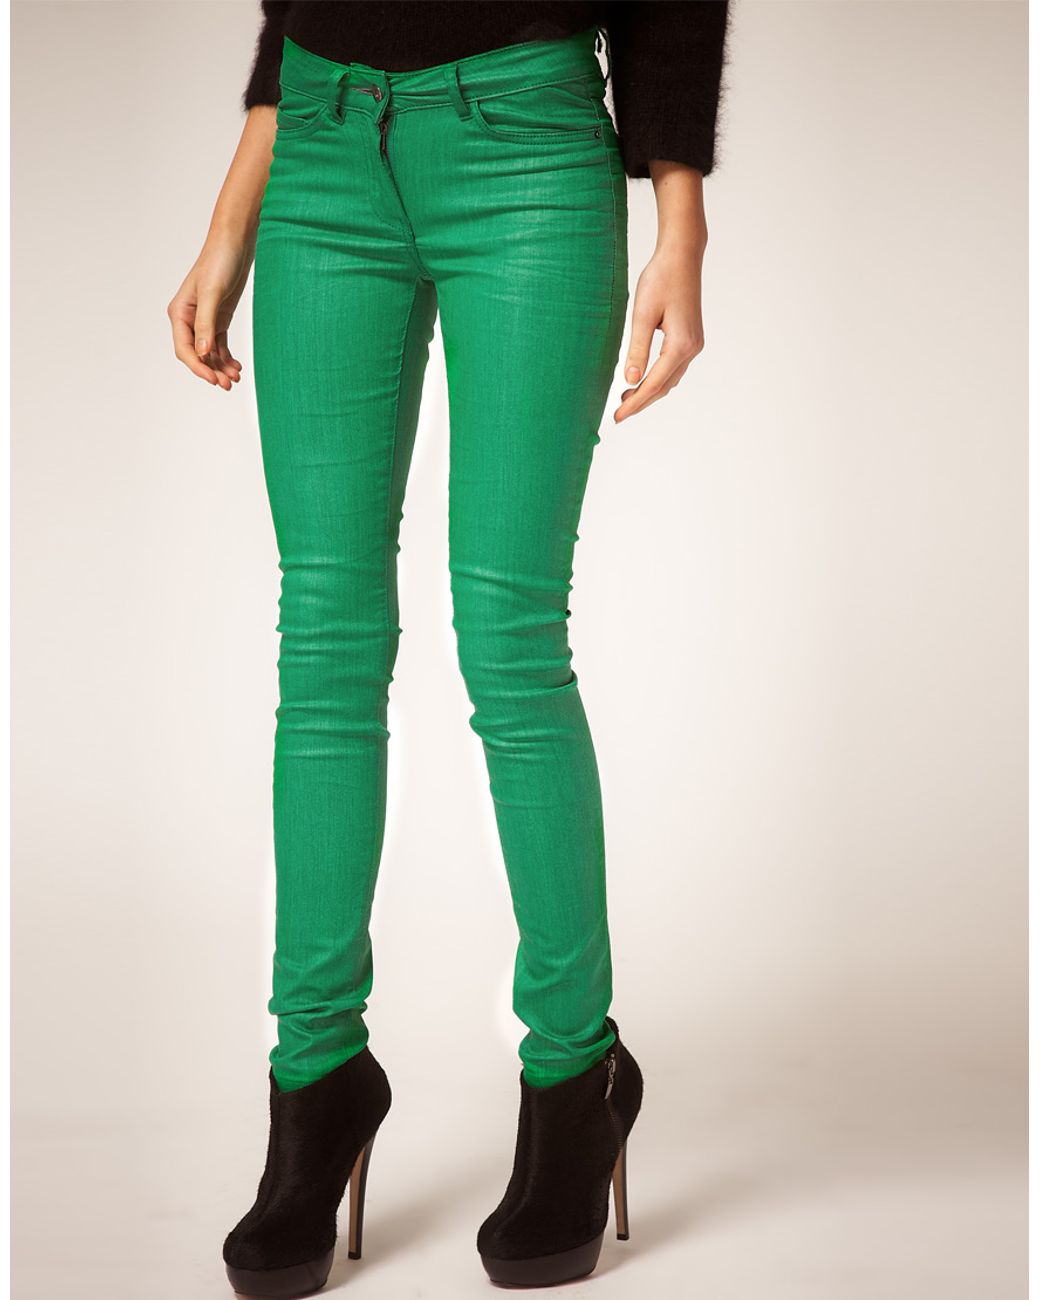 Best Brightly Coloured Jeans For Women at Old Navy | POPSUGAR Fashion UK